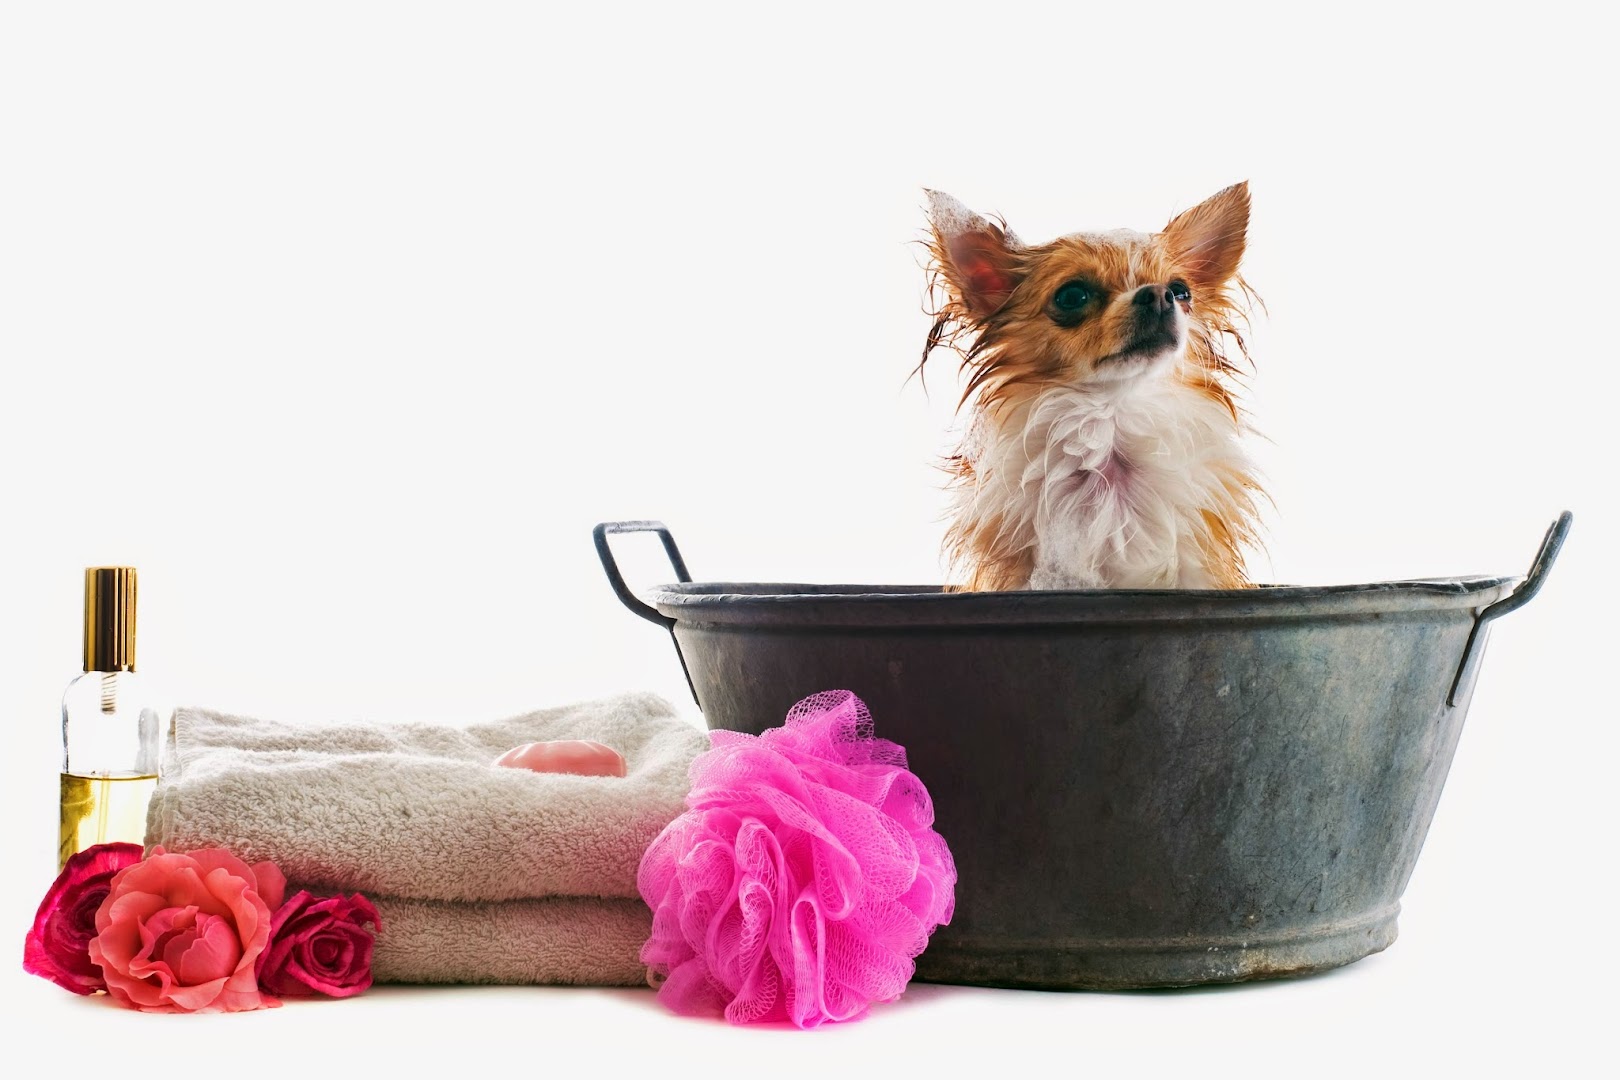 Park & Bark Mobile Grooming Services and Pet Washing